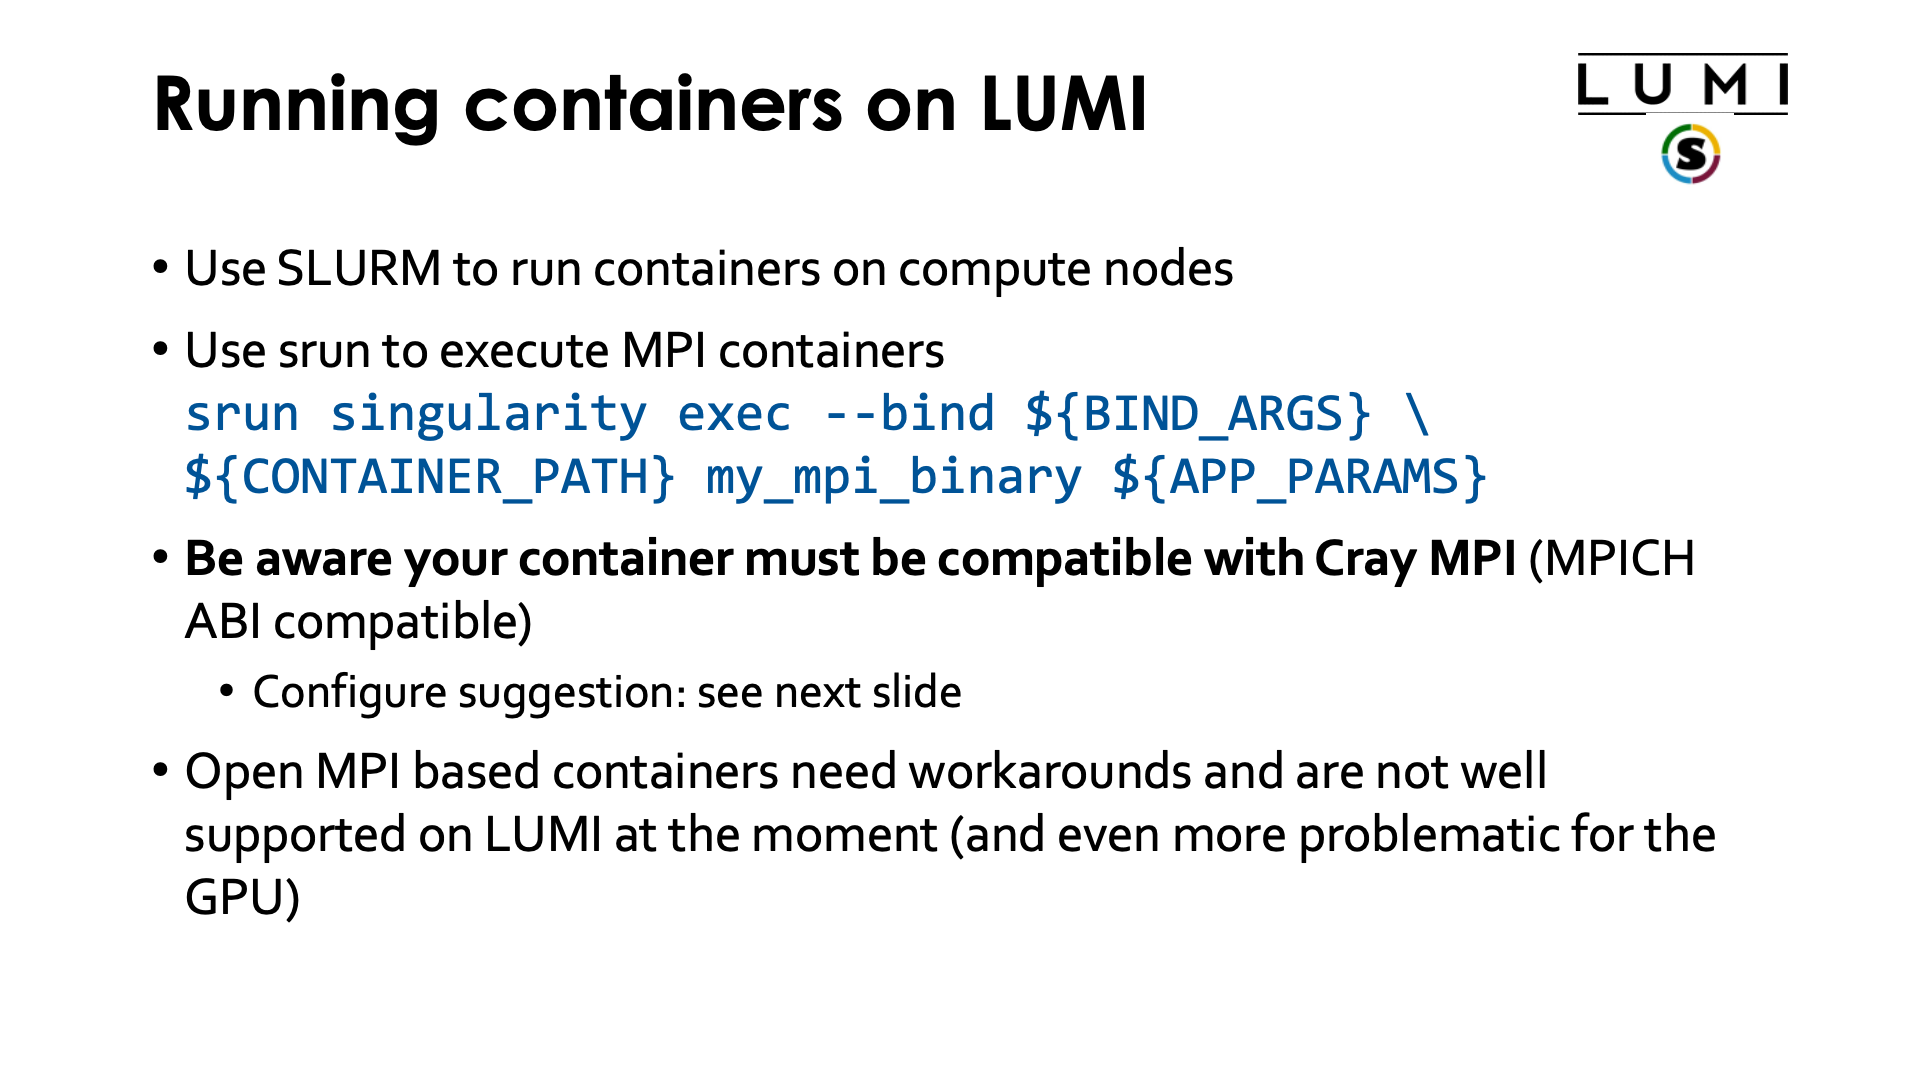 /running containers on LUMI